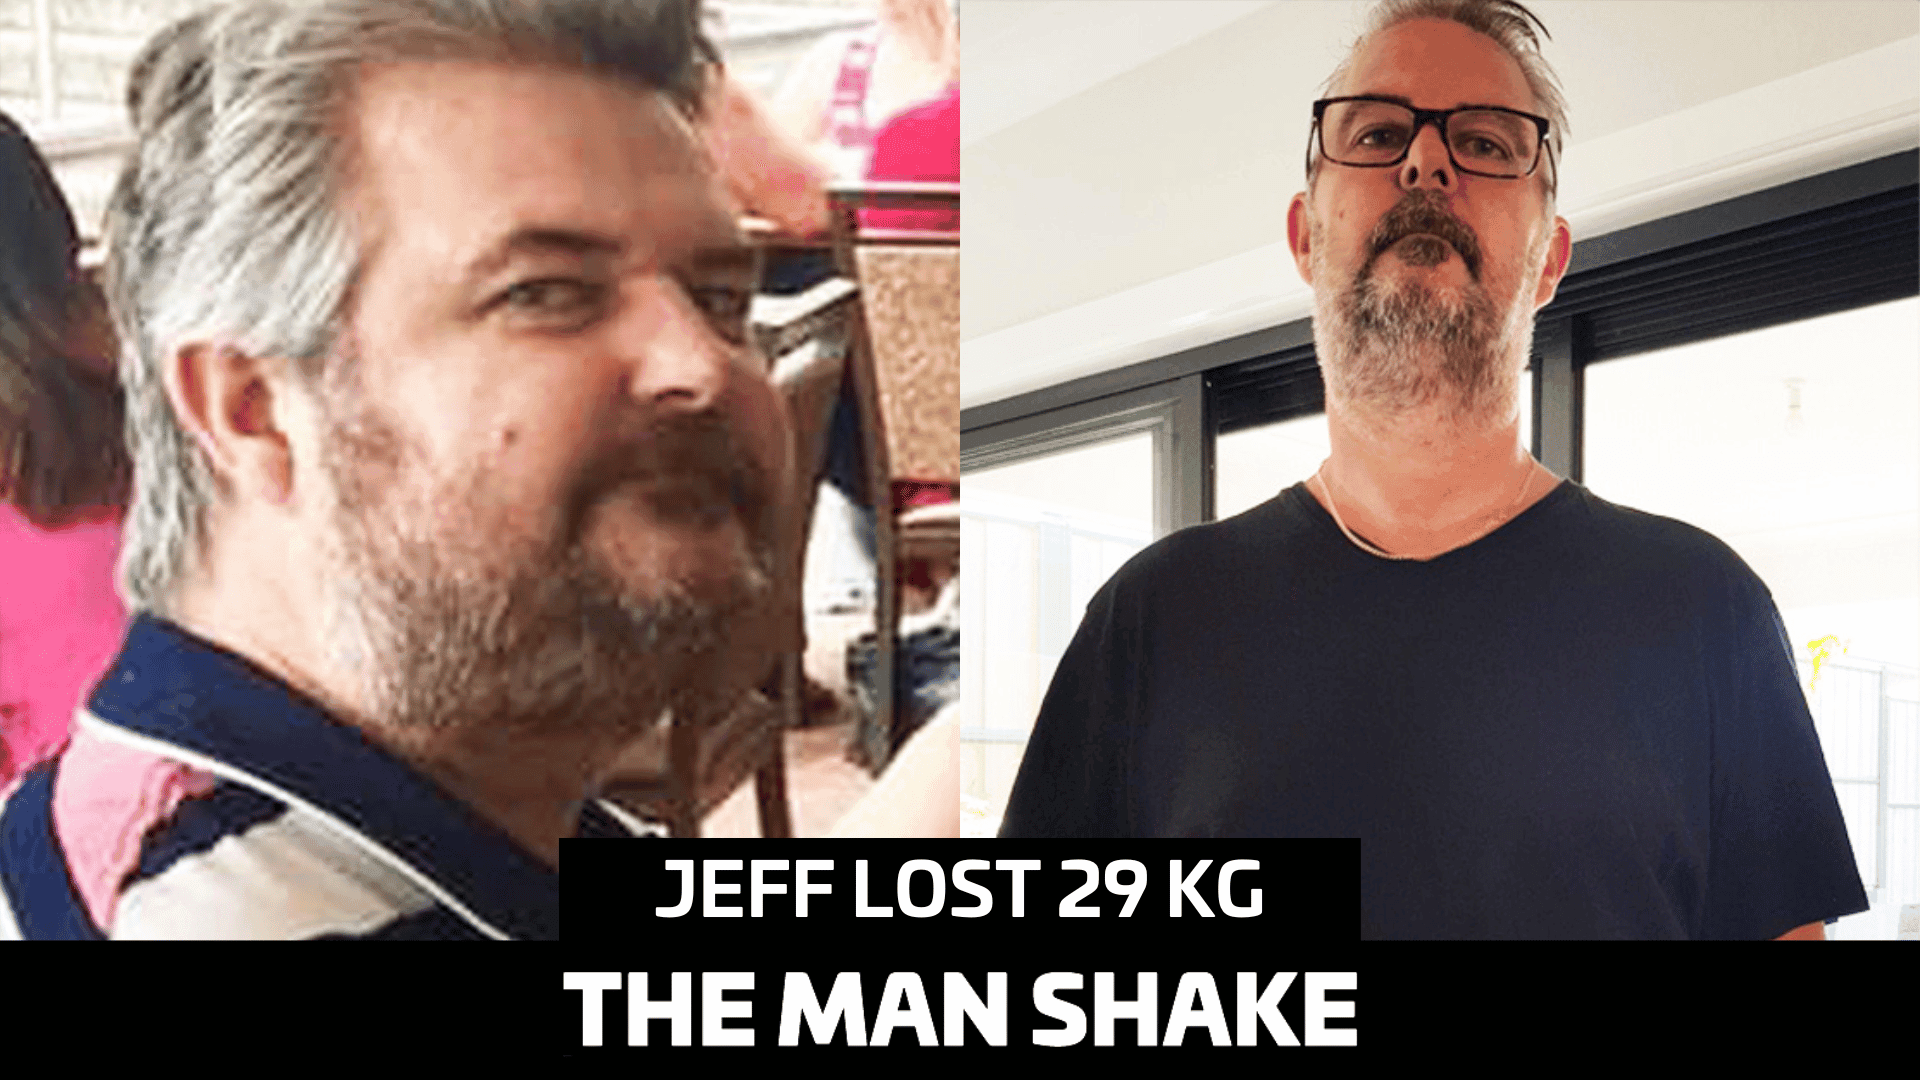 Jeff lost 29kg after seeing the Dr